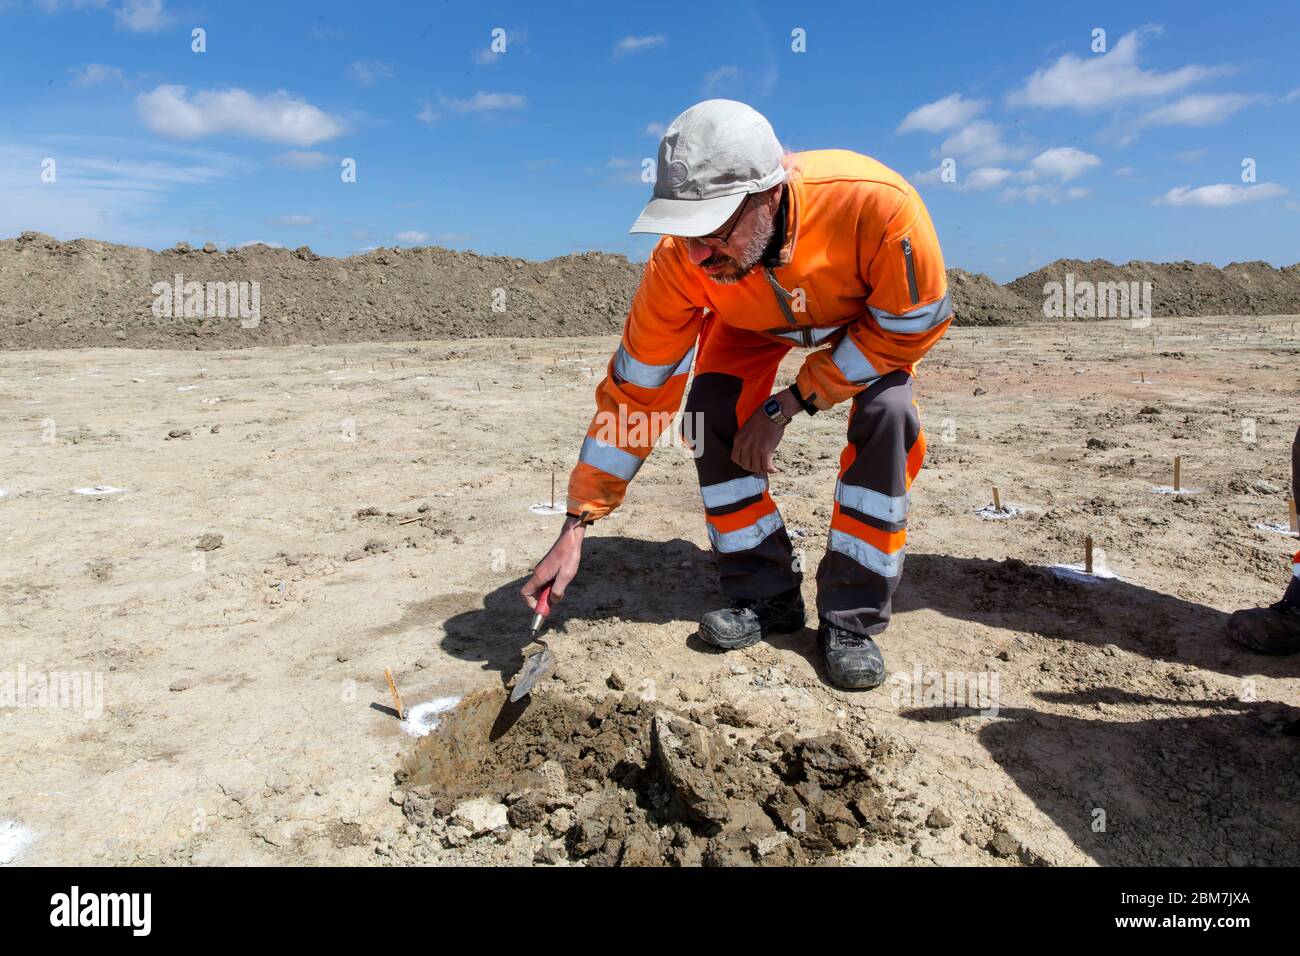 RODBY, DENMARK - MAY 06, 2020:  Archaeologist from Museum Lolland-Falster in Denmark, Søren Jensen, at  work with his brick trowel at the  1 km long and 15 meter wide excavation pit which have revealed a 2.000 years old Iron Age defence belt at the soon to come Fehmernbelt Tunnel  construction site in the south-eastern  Denmark at the Baltic Sea shoreline. The defence line consist of some 5.000 holes, probably with hidden sharp oak spikes so an invading force coming from the sea, maybe from Northern Germany, would be injured by spikes penetrating their feet, or horses would plunge to the groun Stock Photo